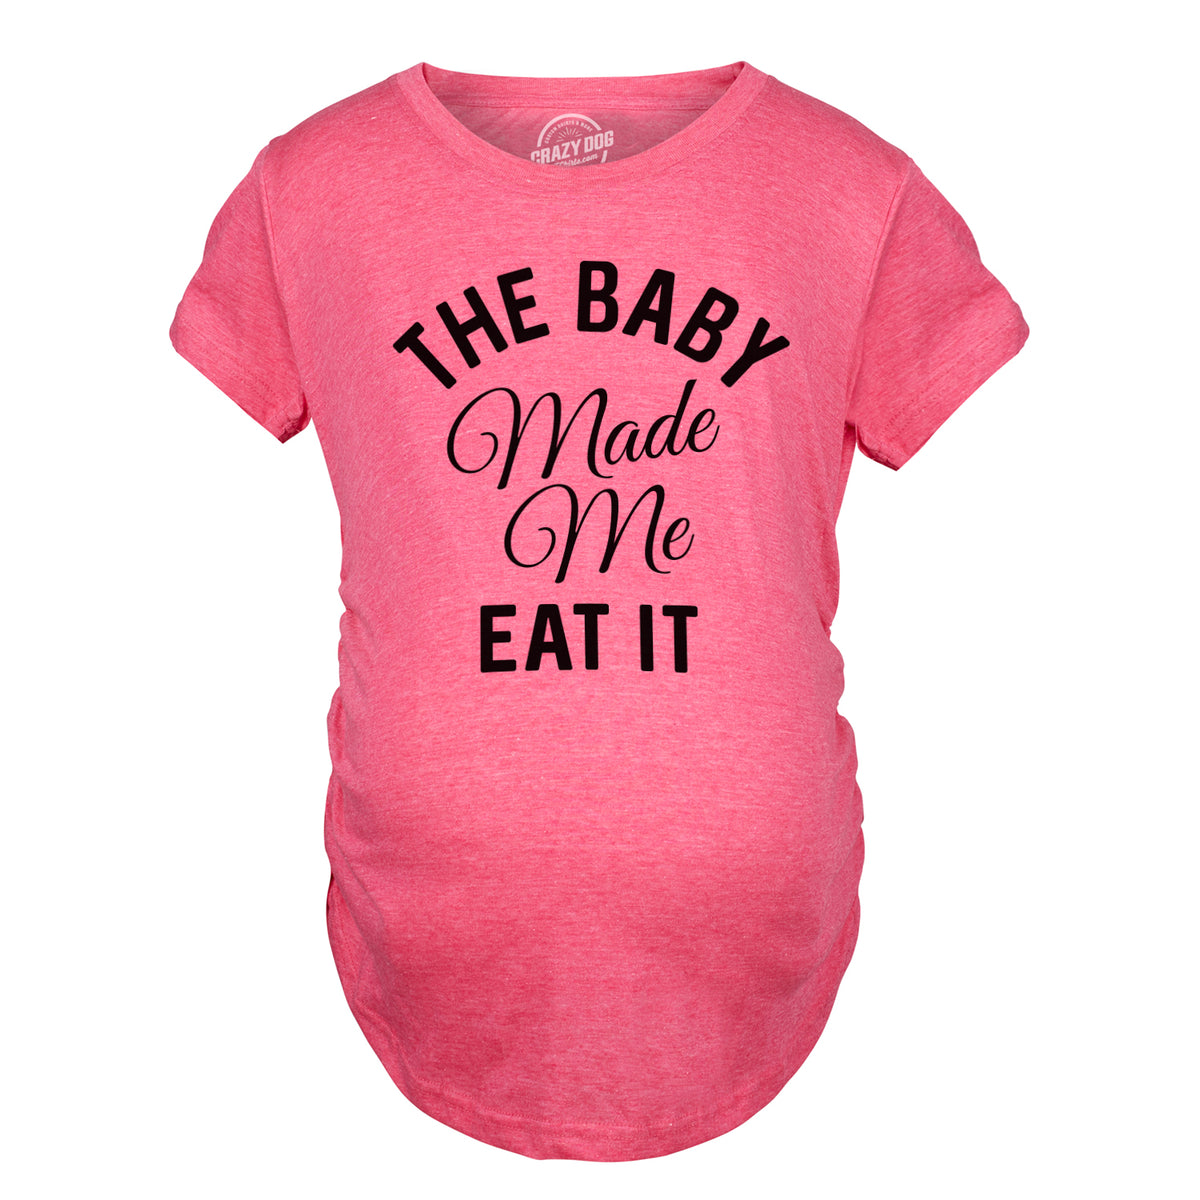 The Baby Made Me Eat It Maternity Tshirt